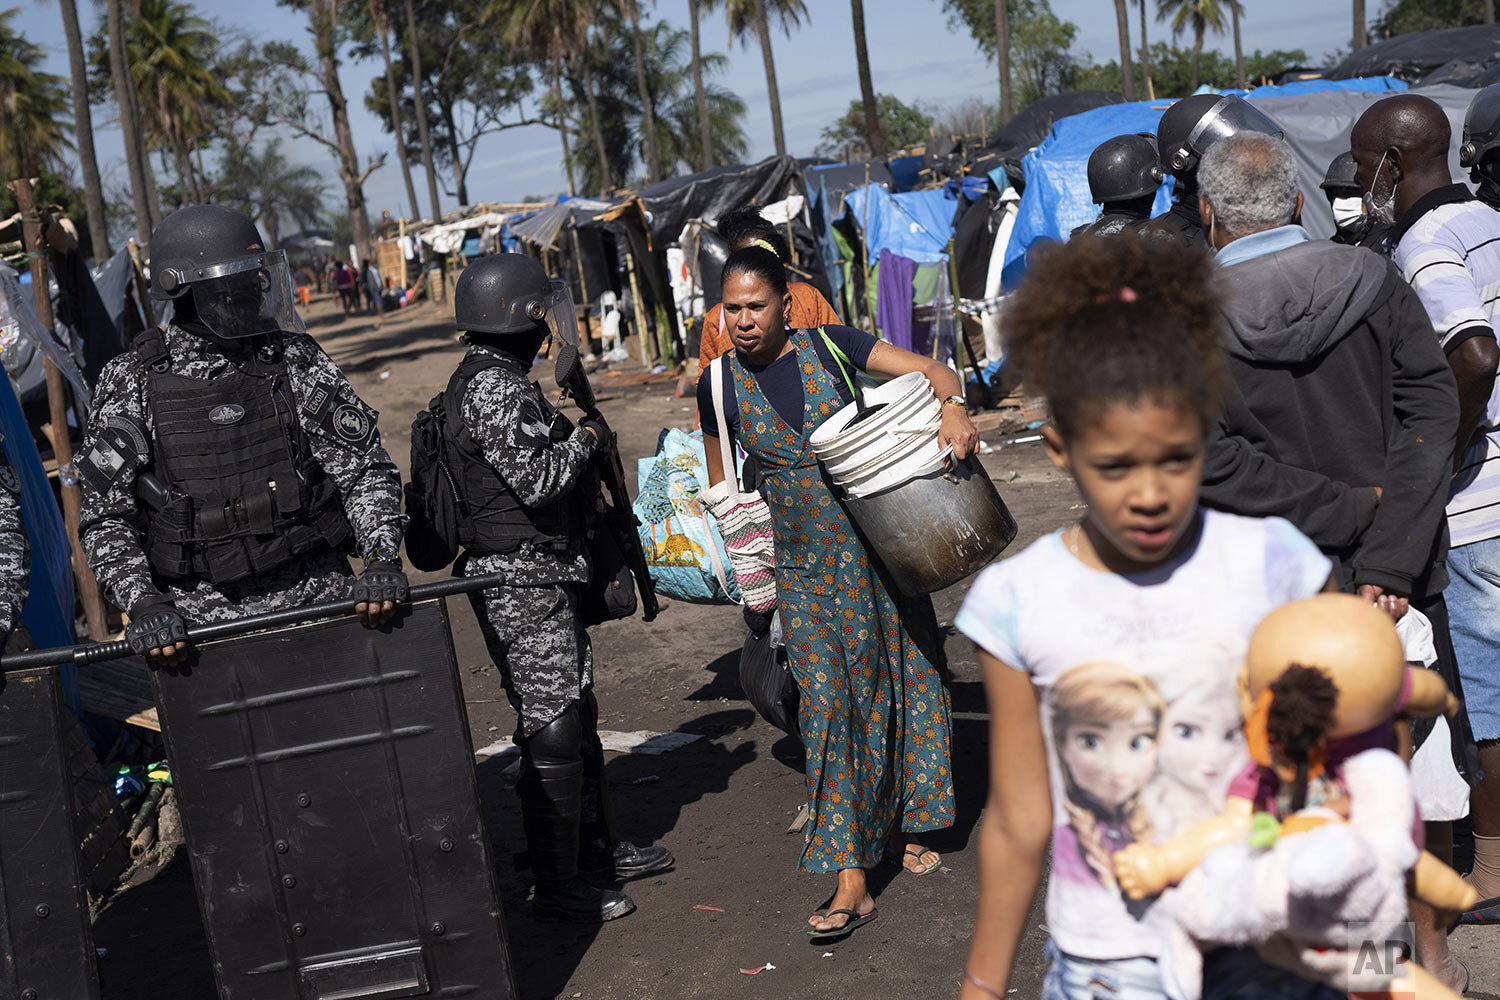  People are evicted from land designated for a Petrobras refinery, at a settlement coined the "First of May Refugee Camp," referring to the date people moved here and set up tents and shacks to live in during the new coronavirus pandemic in Itaguai, 